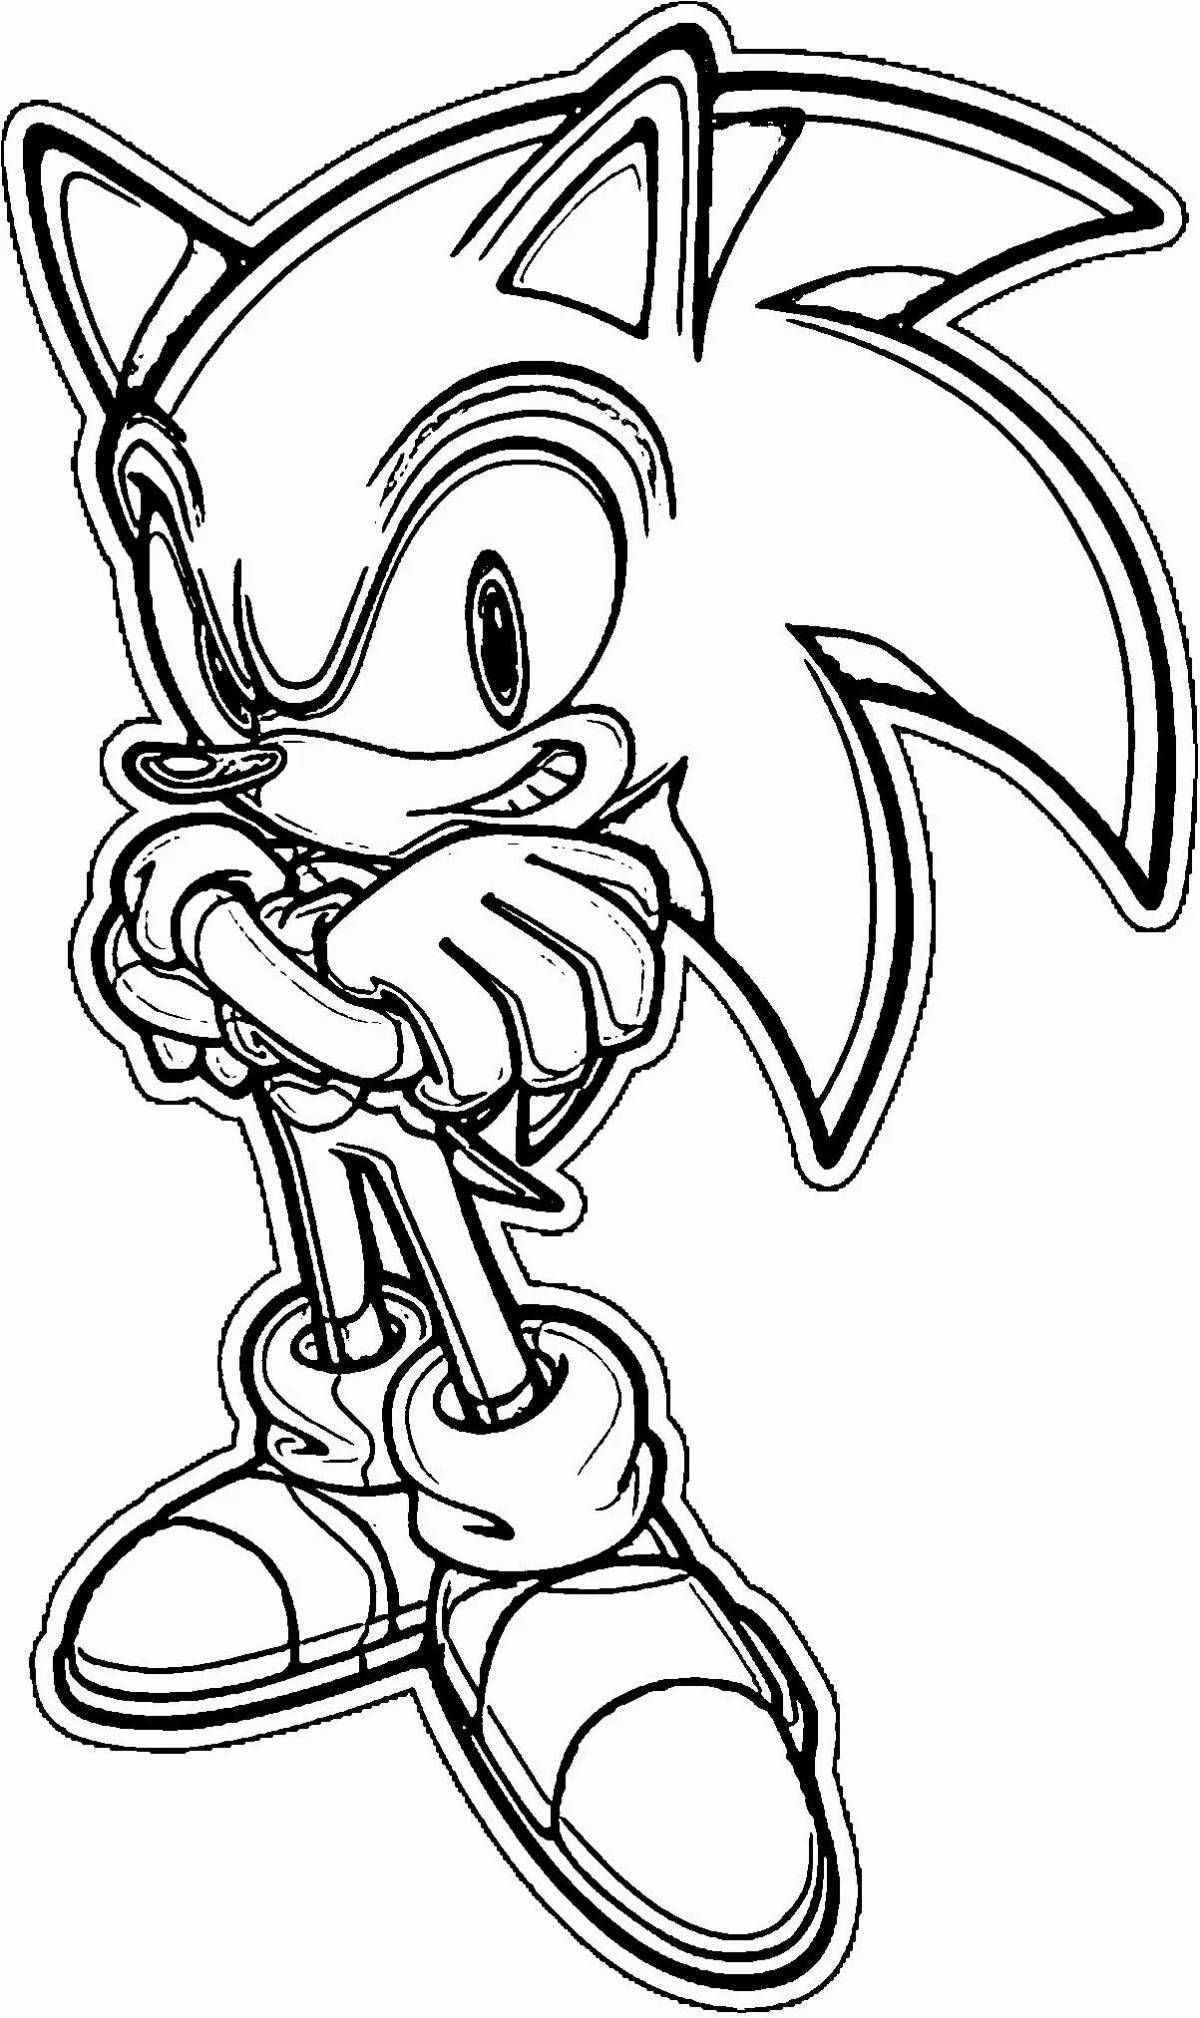 Animated sonic mania coloring book